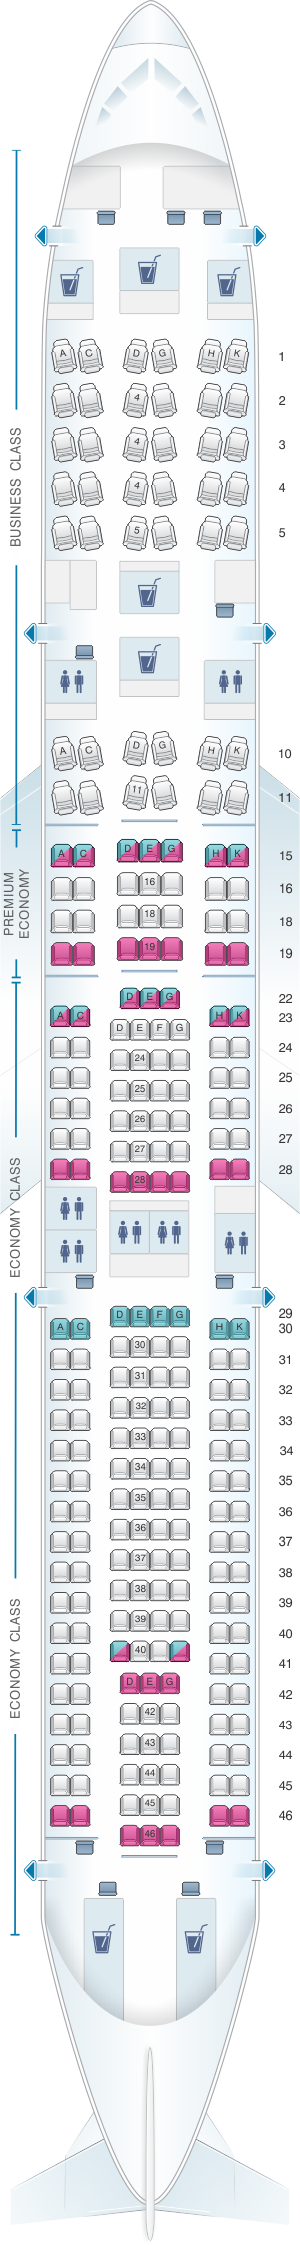 Seat map for Lufthansa Airbus A330 300 255pax